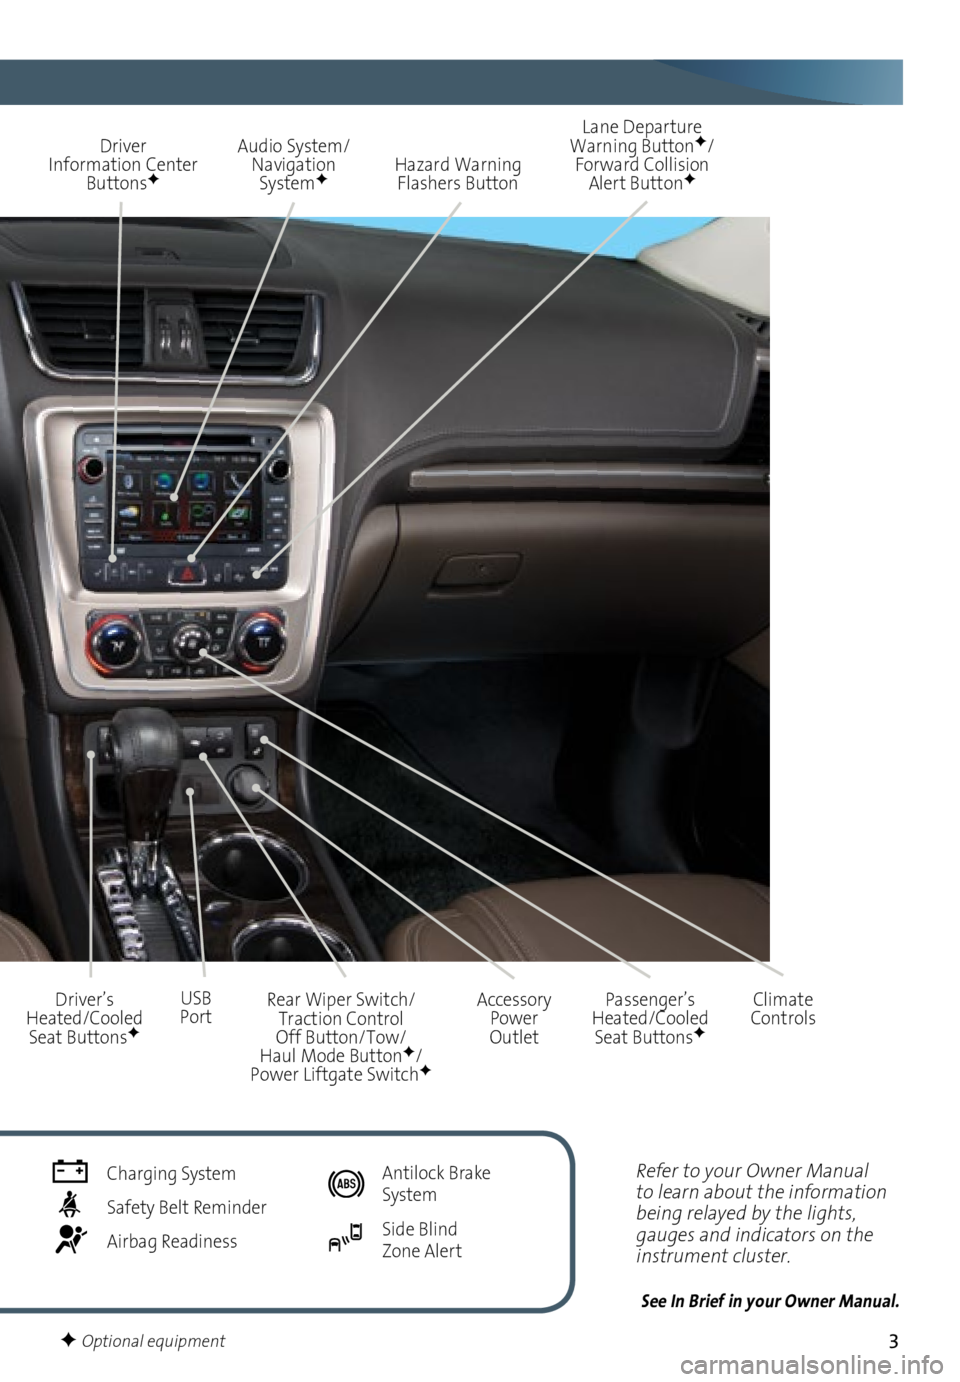 GMC ACADIA 2016  Get To Know Guide 3
Refer to your Owner Manual 
to learn about the information 
being relayed by the lights, 
gauges and indicators on the 
instrument cluster.
See In Brief in your Owner Manual.
Driver Information Cent